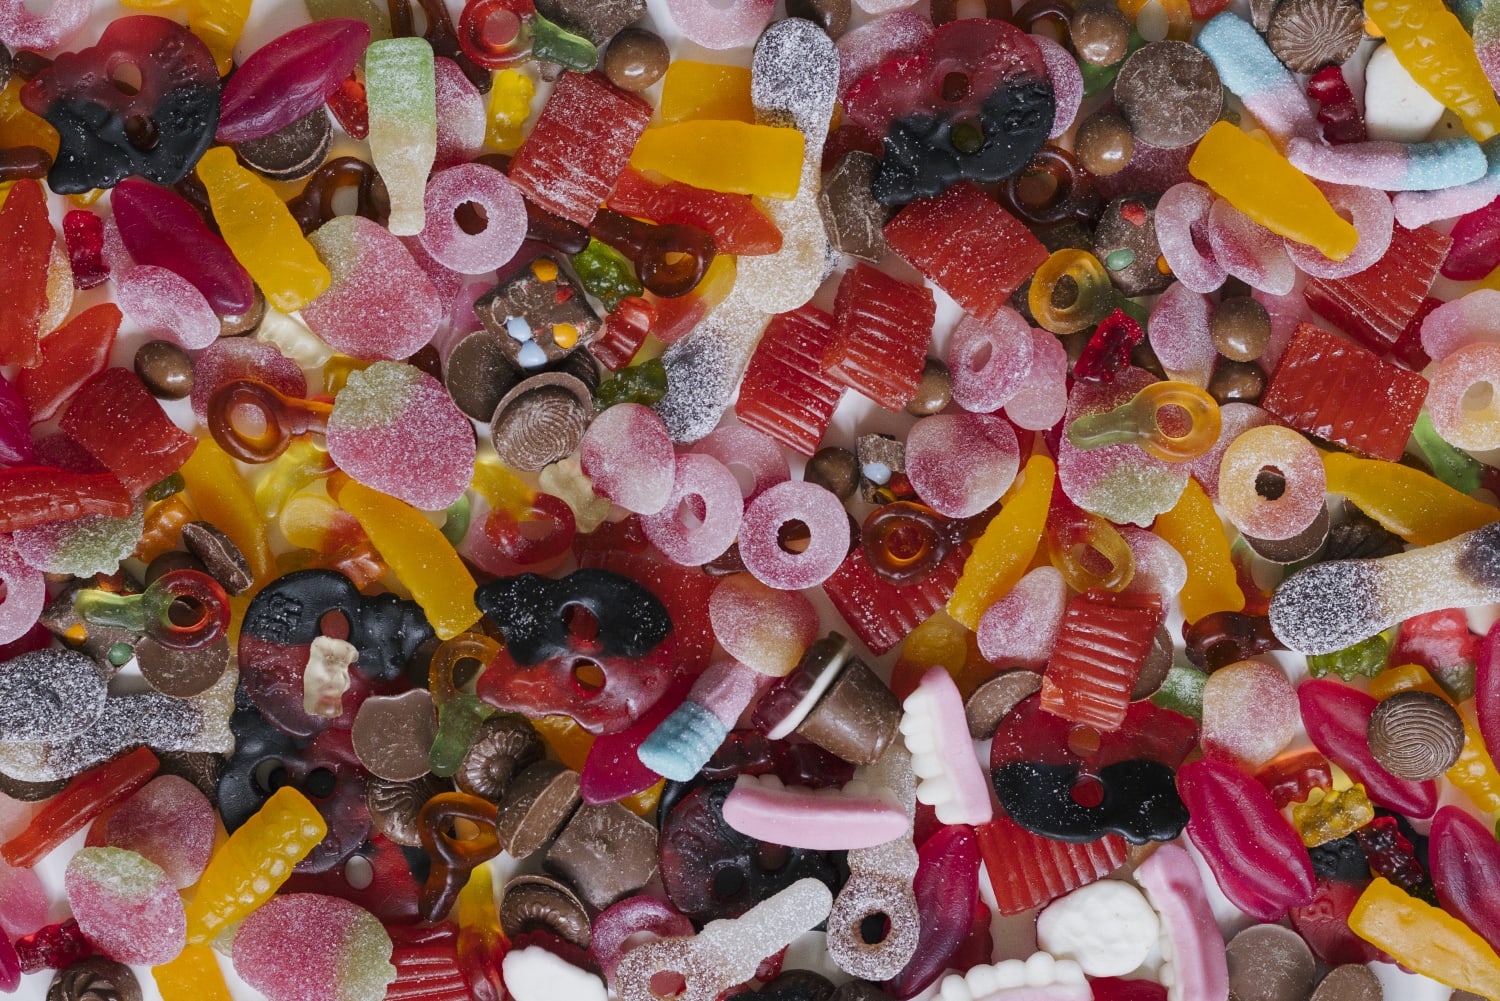 Why are people so obsessed with Swedish candy right now?